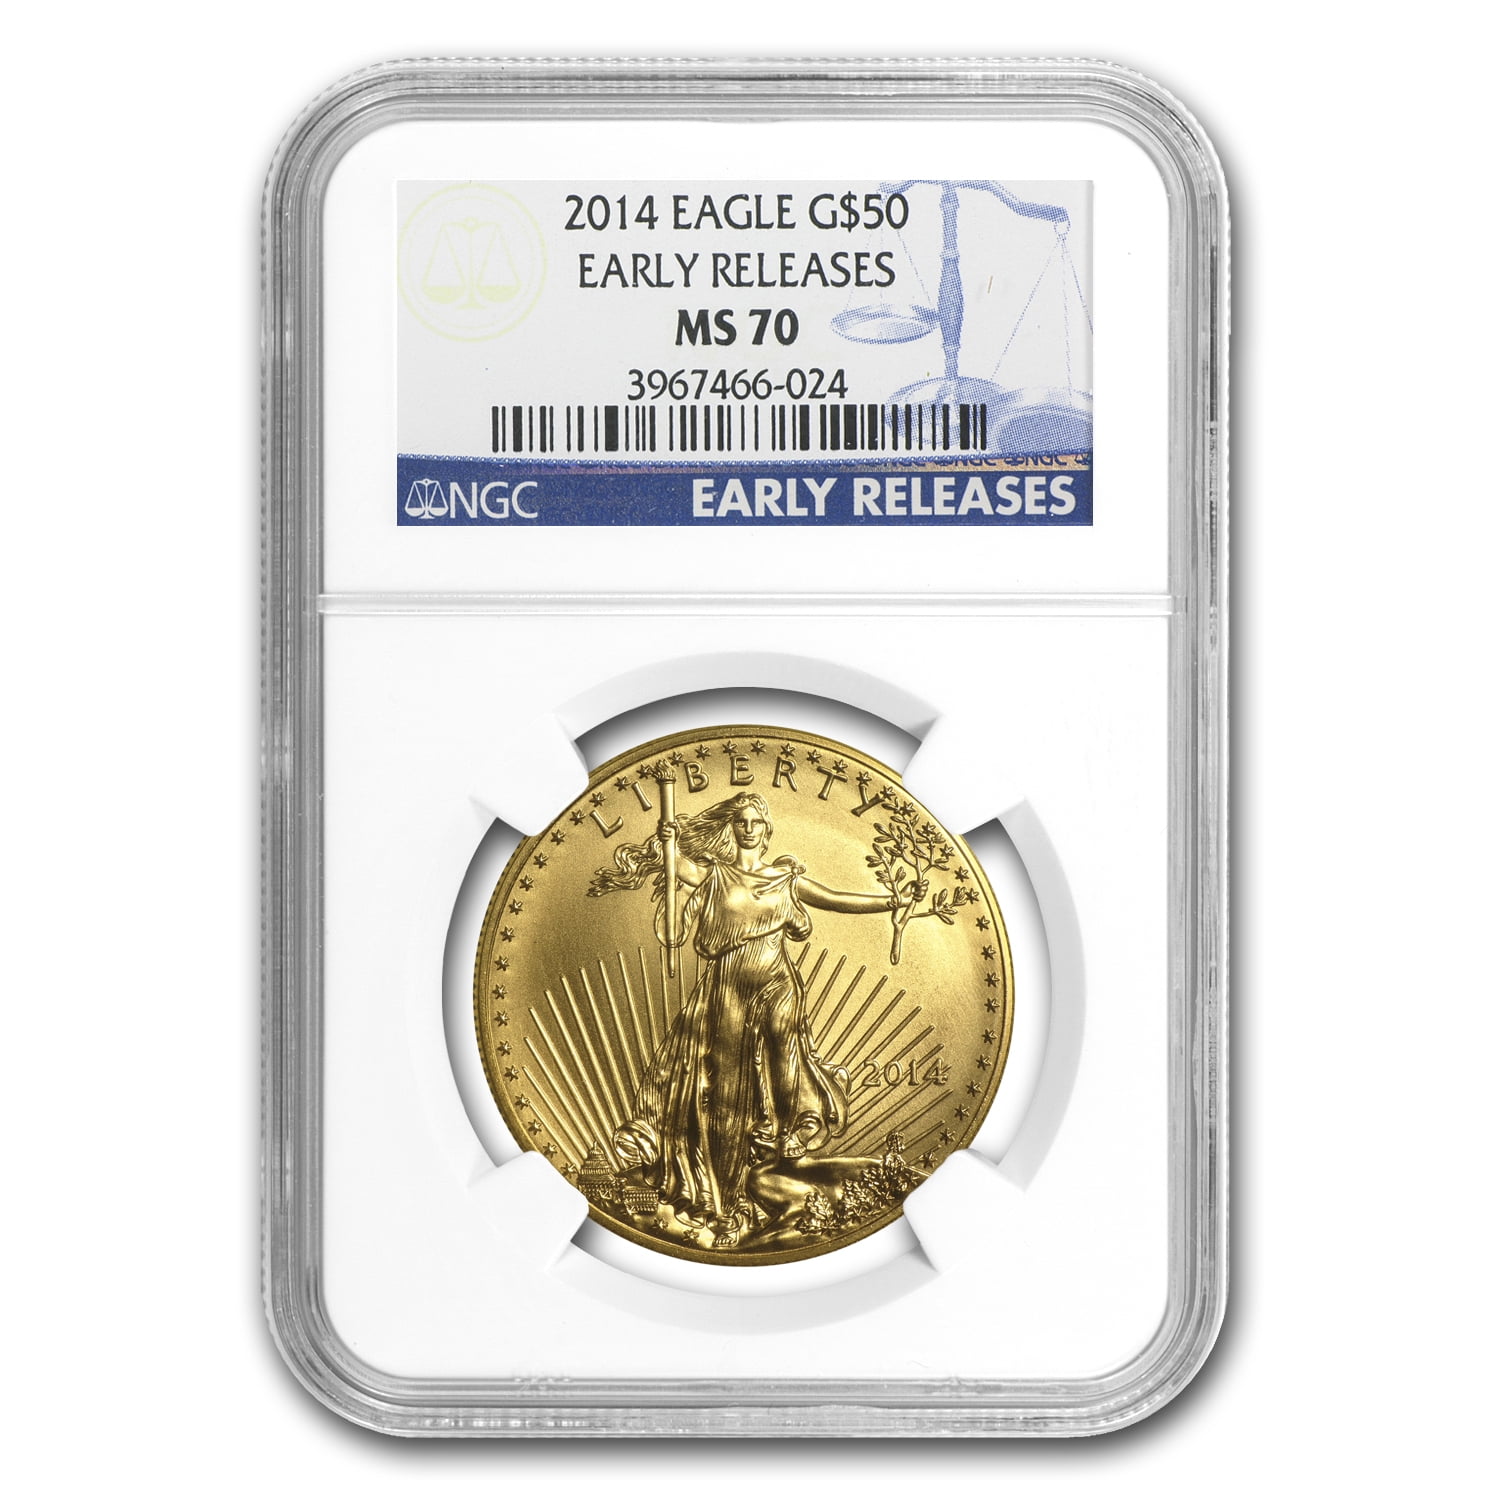 2012 American Gold Eagle 1/10 oz $5 Early Releases NGC MS70 